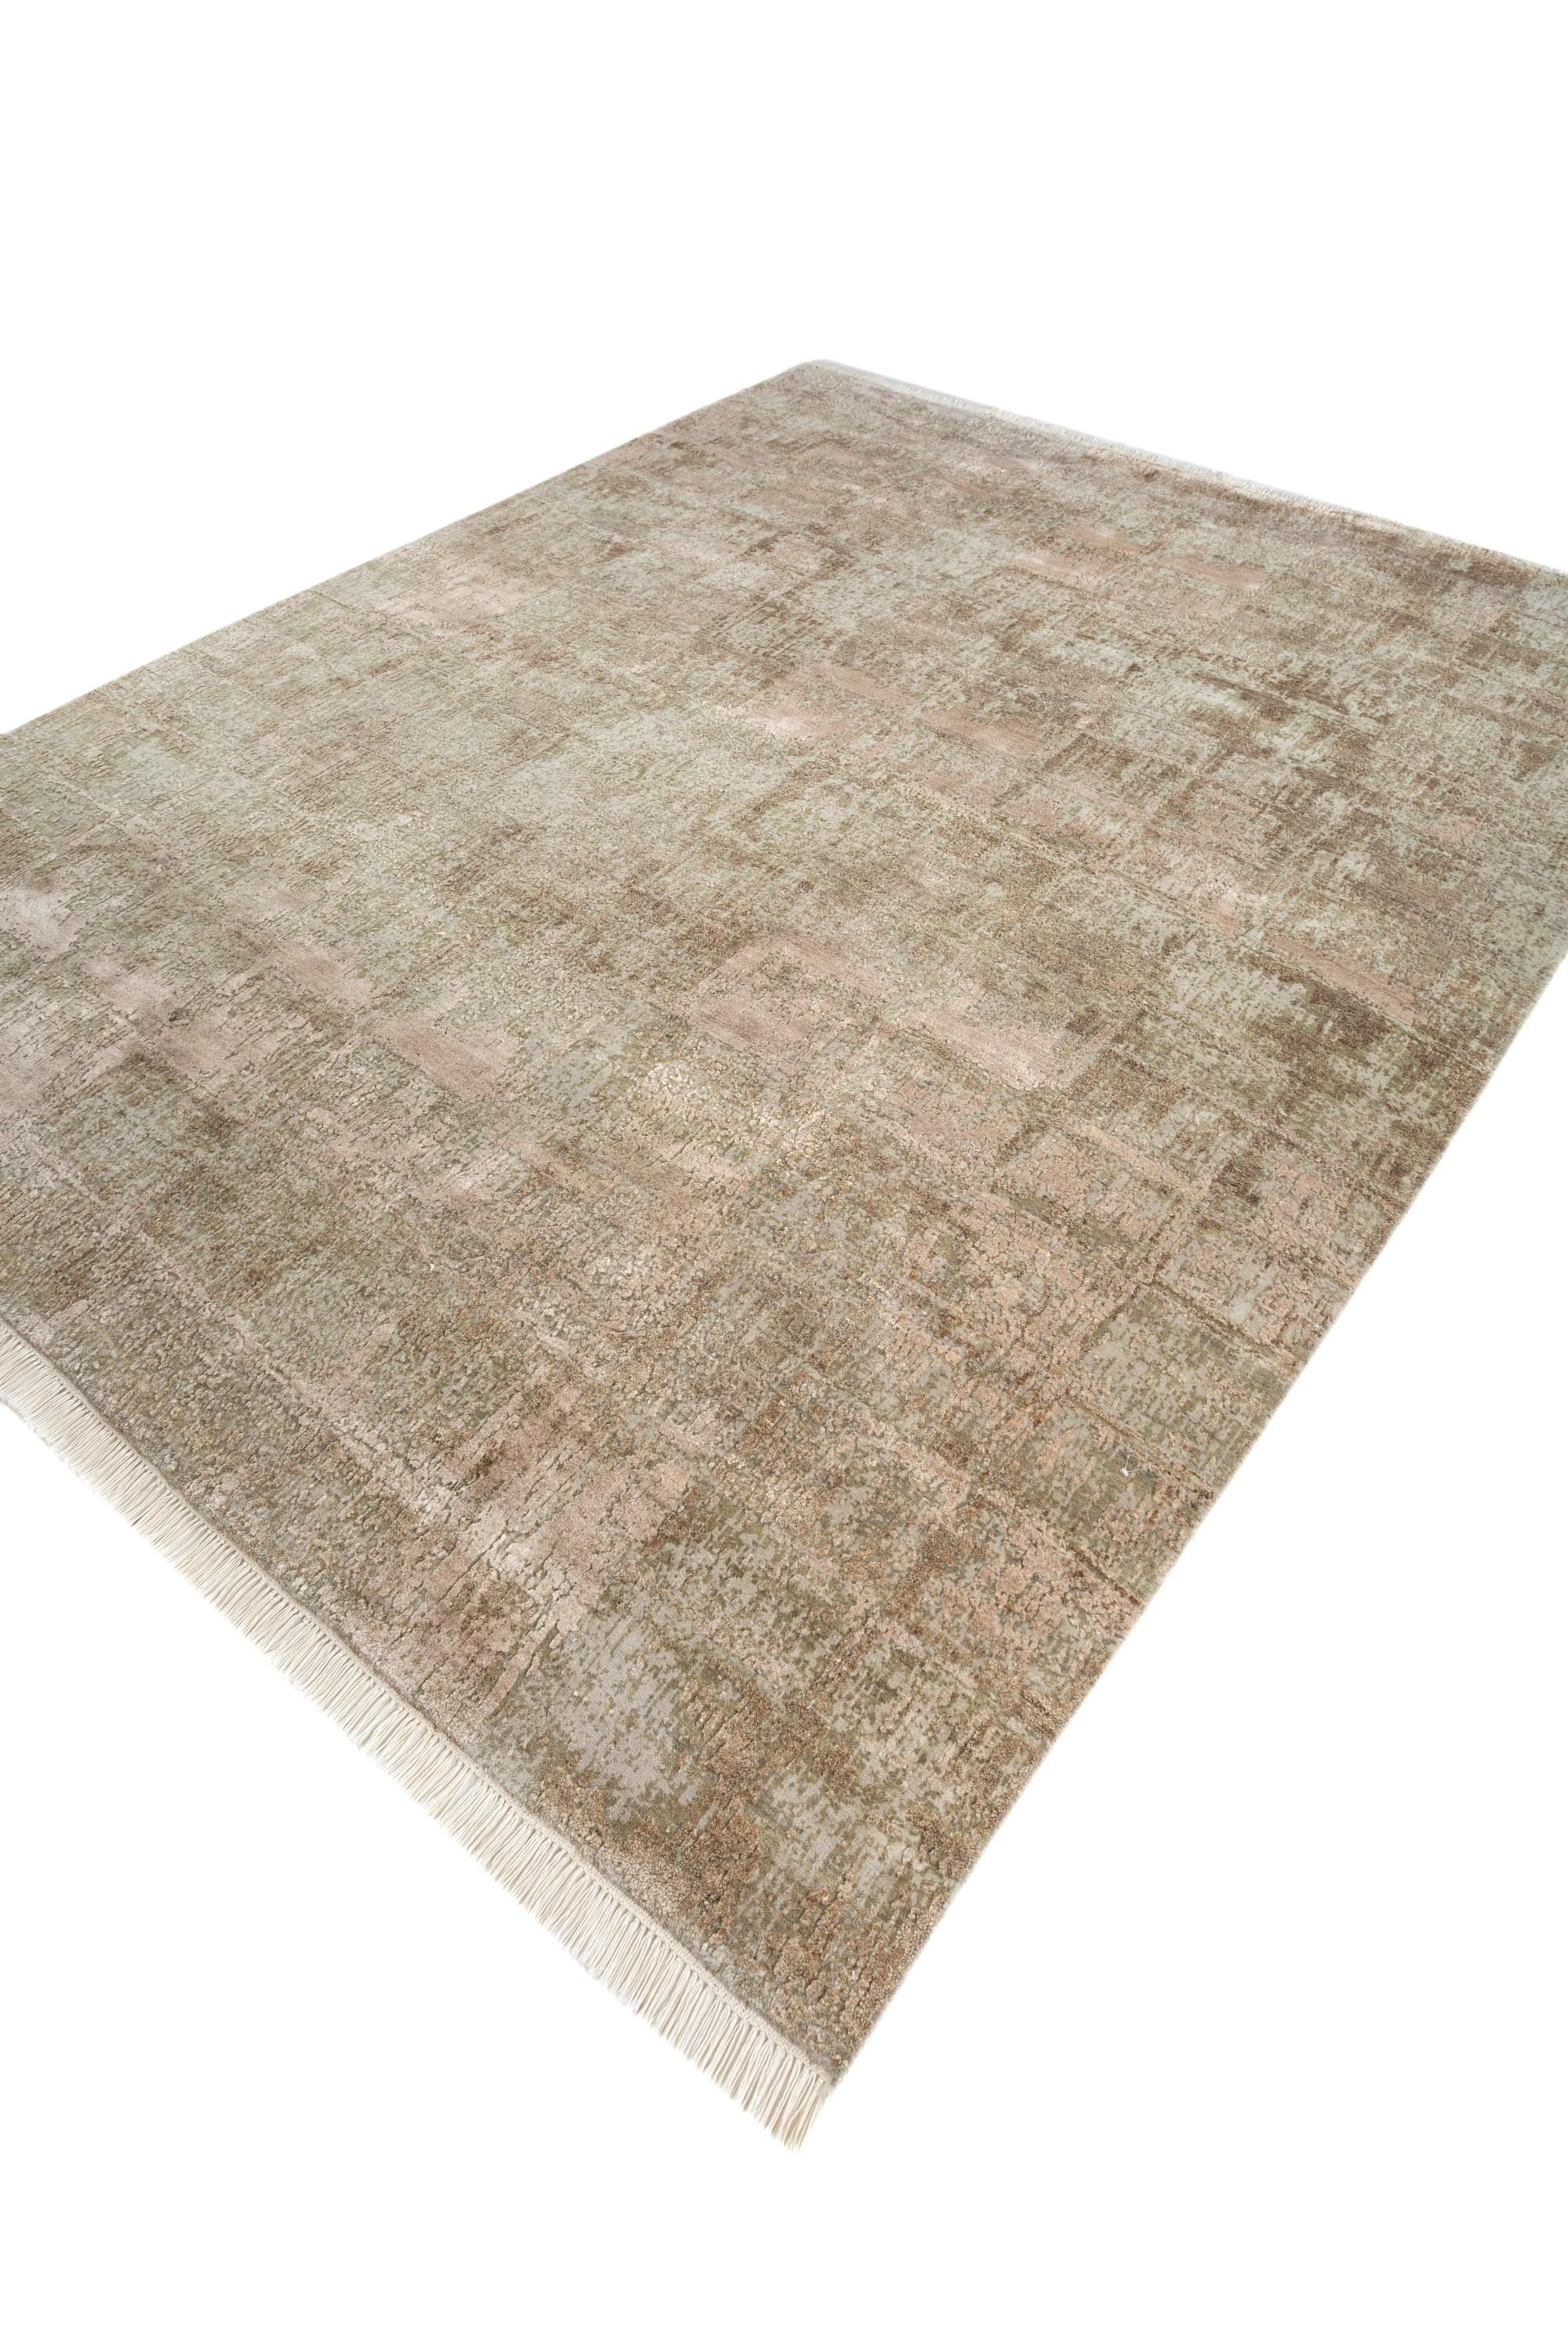 Indian Calm Chaos Dark Ivory 240X300 Cm Modern handknotted Rug For Sale